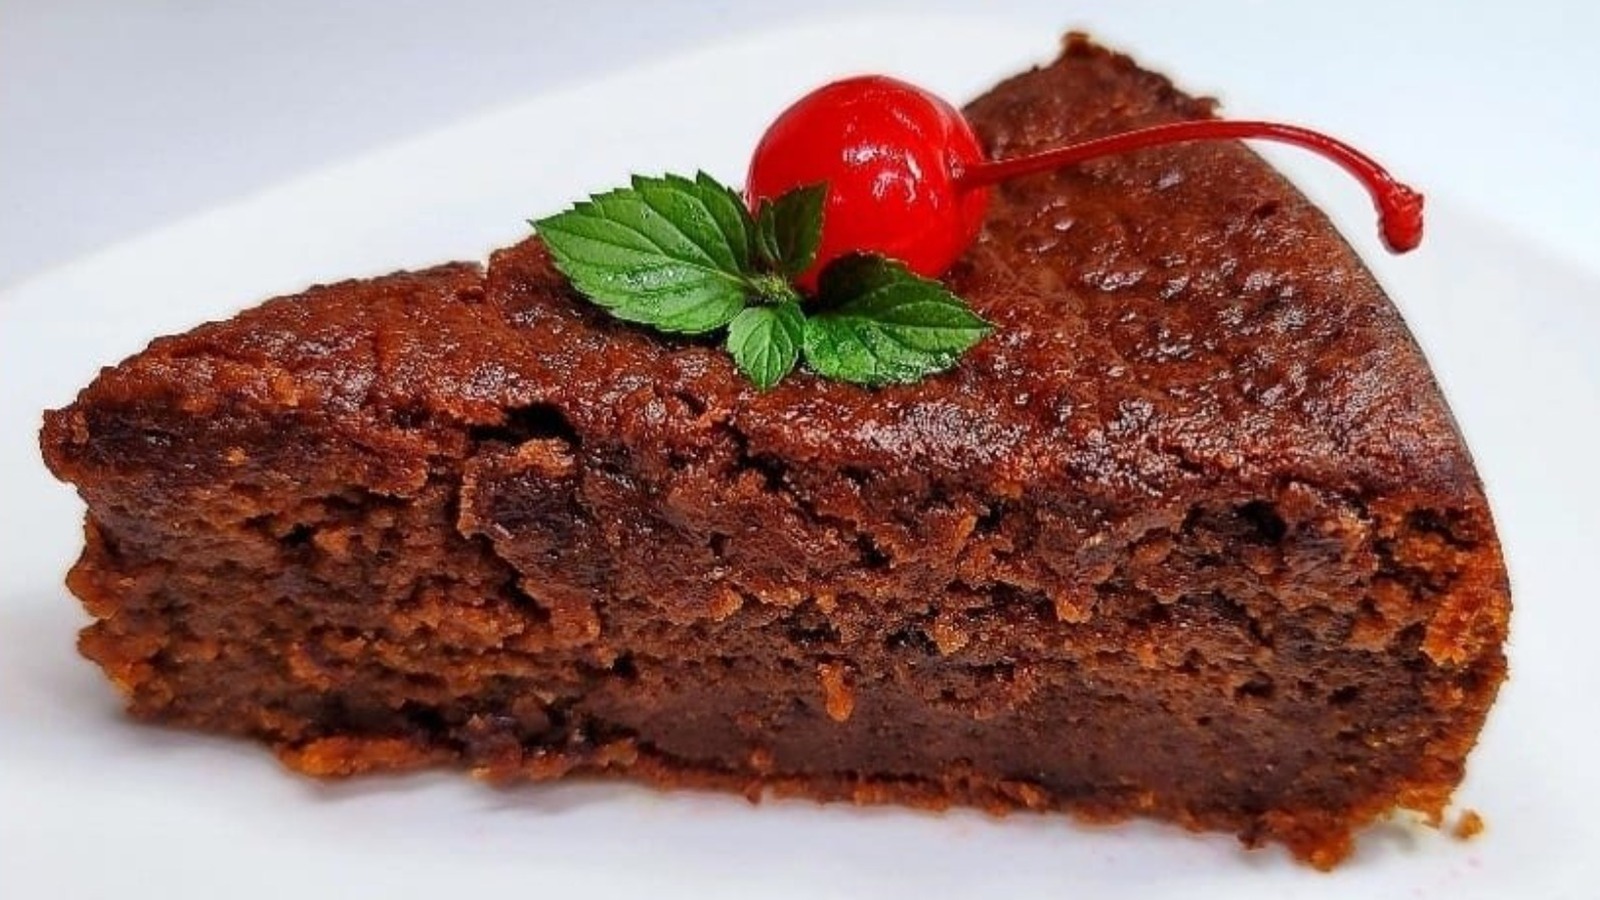 How Black Cake Became A Christmas Staple Of Caribbean Cuisine - Mashed